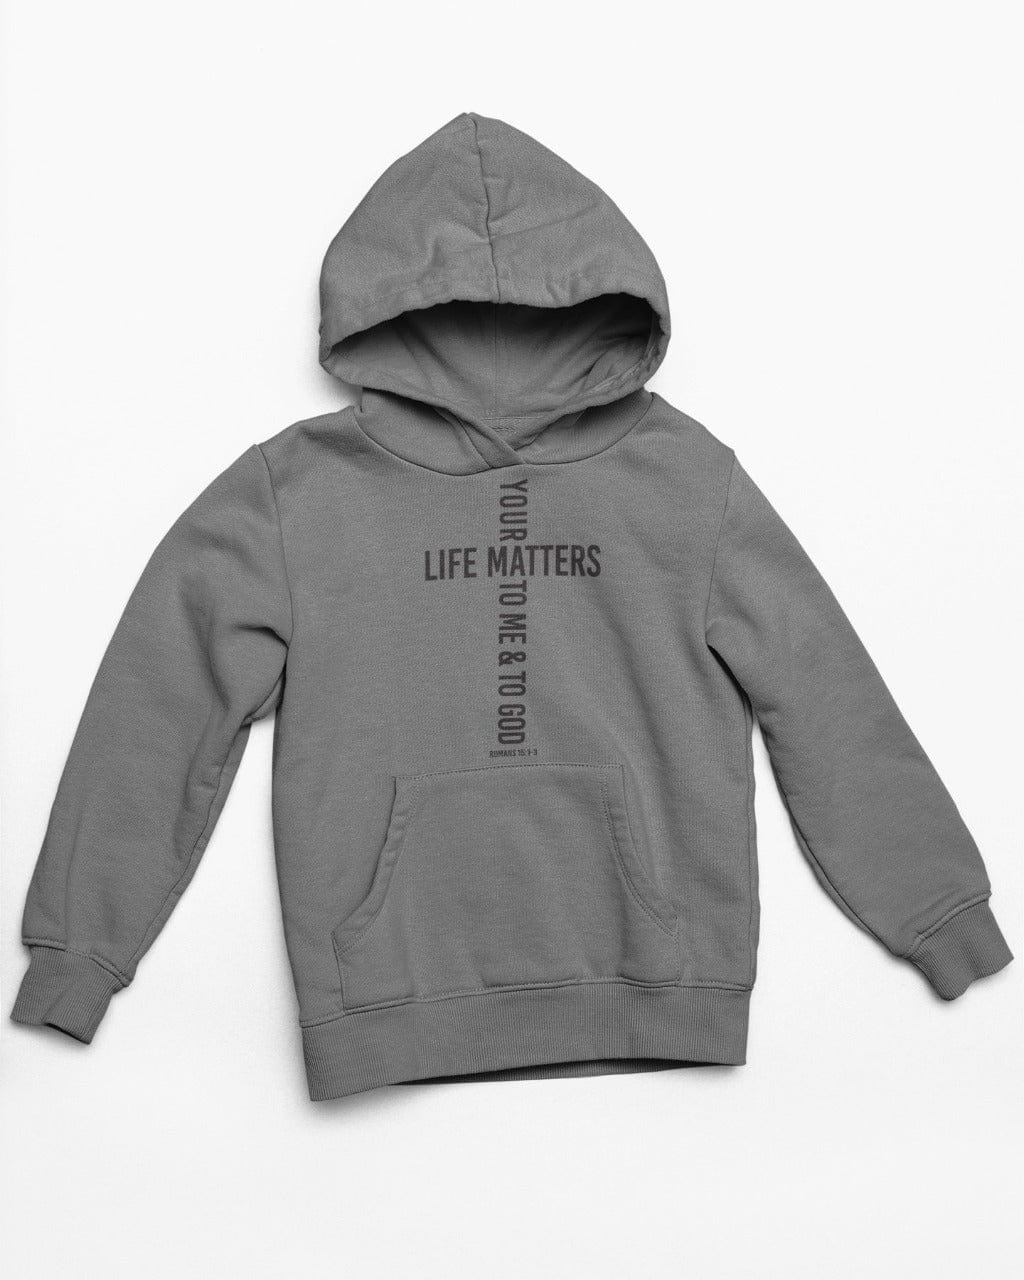 Wrighteous Wear Hoodie Sport Gray / S Your Life Matters Unisex Christian Hoodie